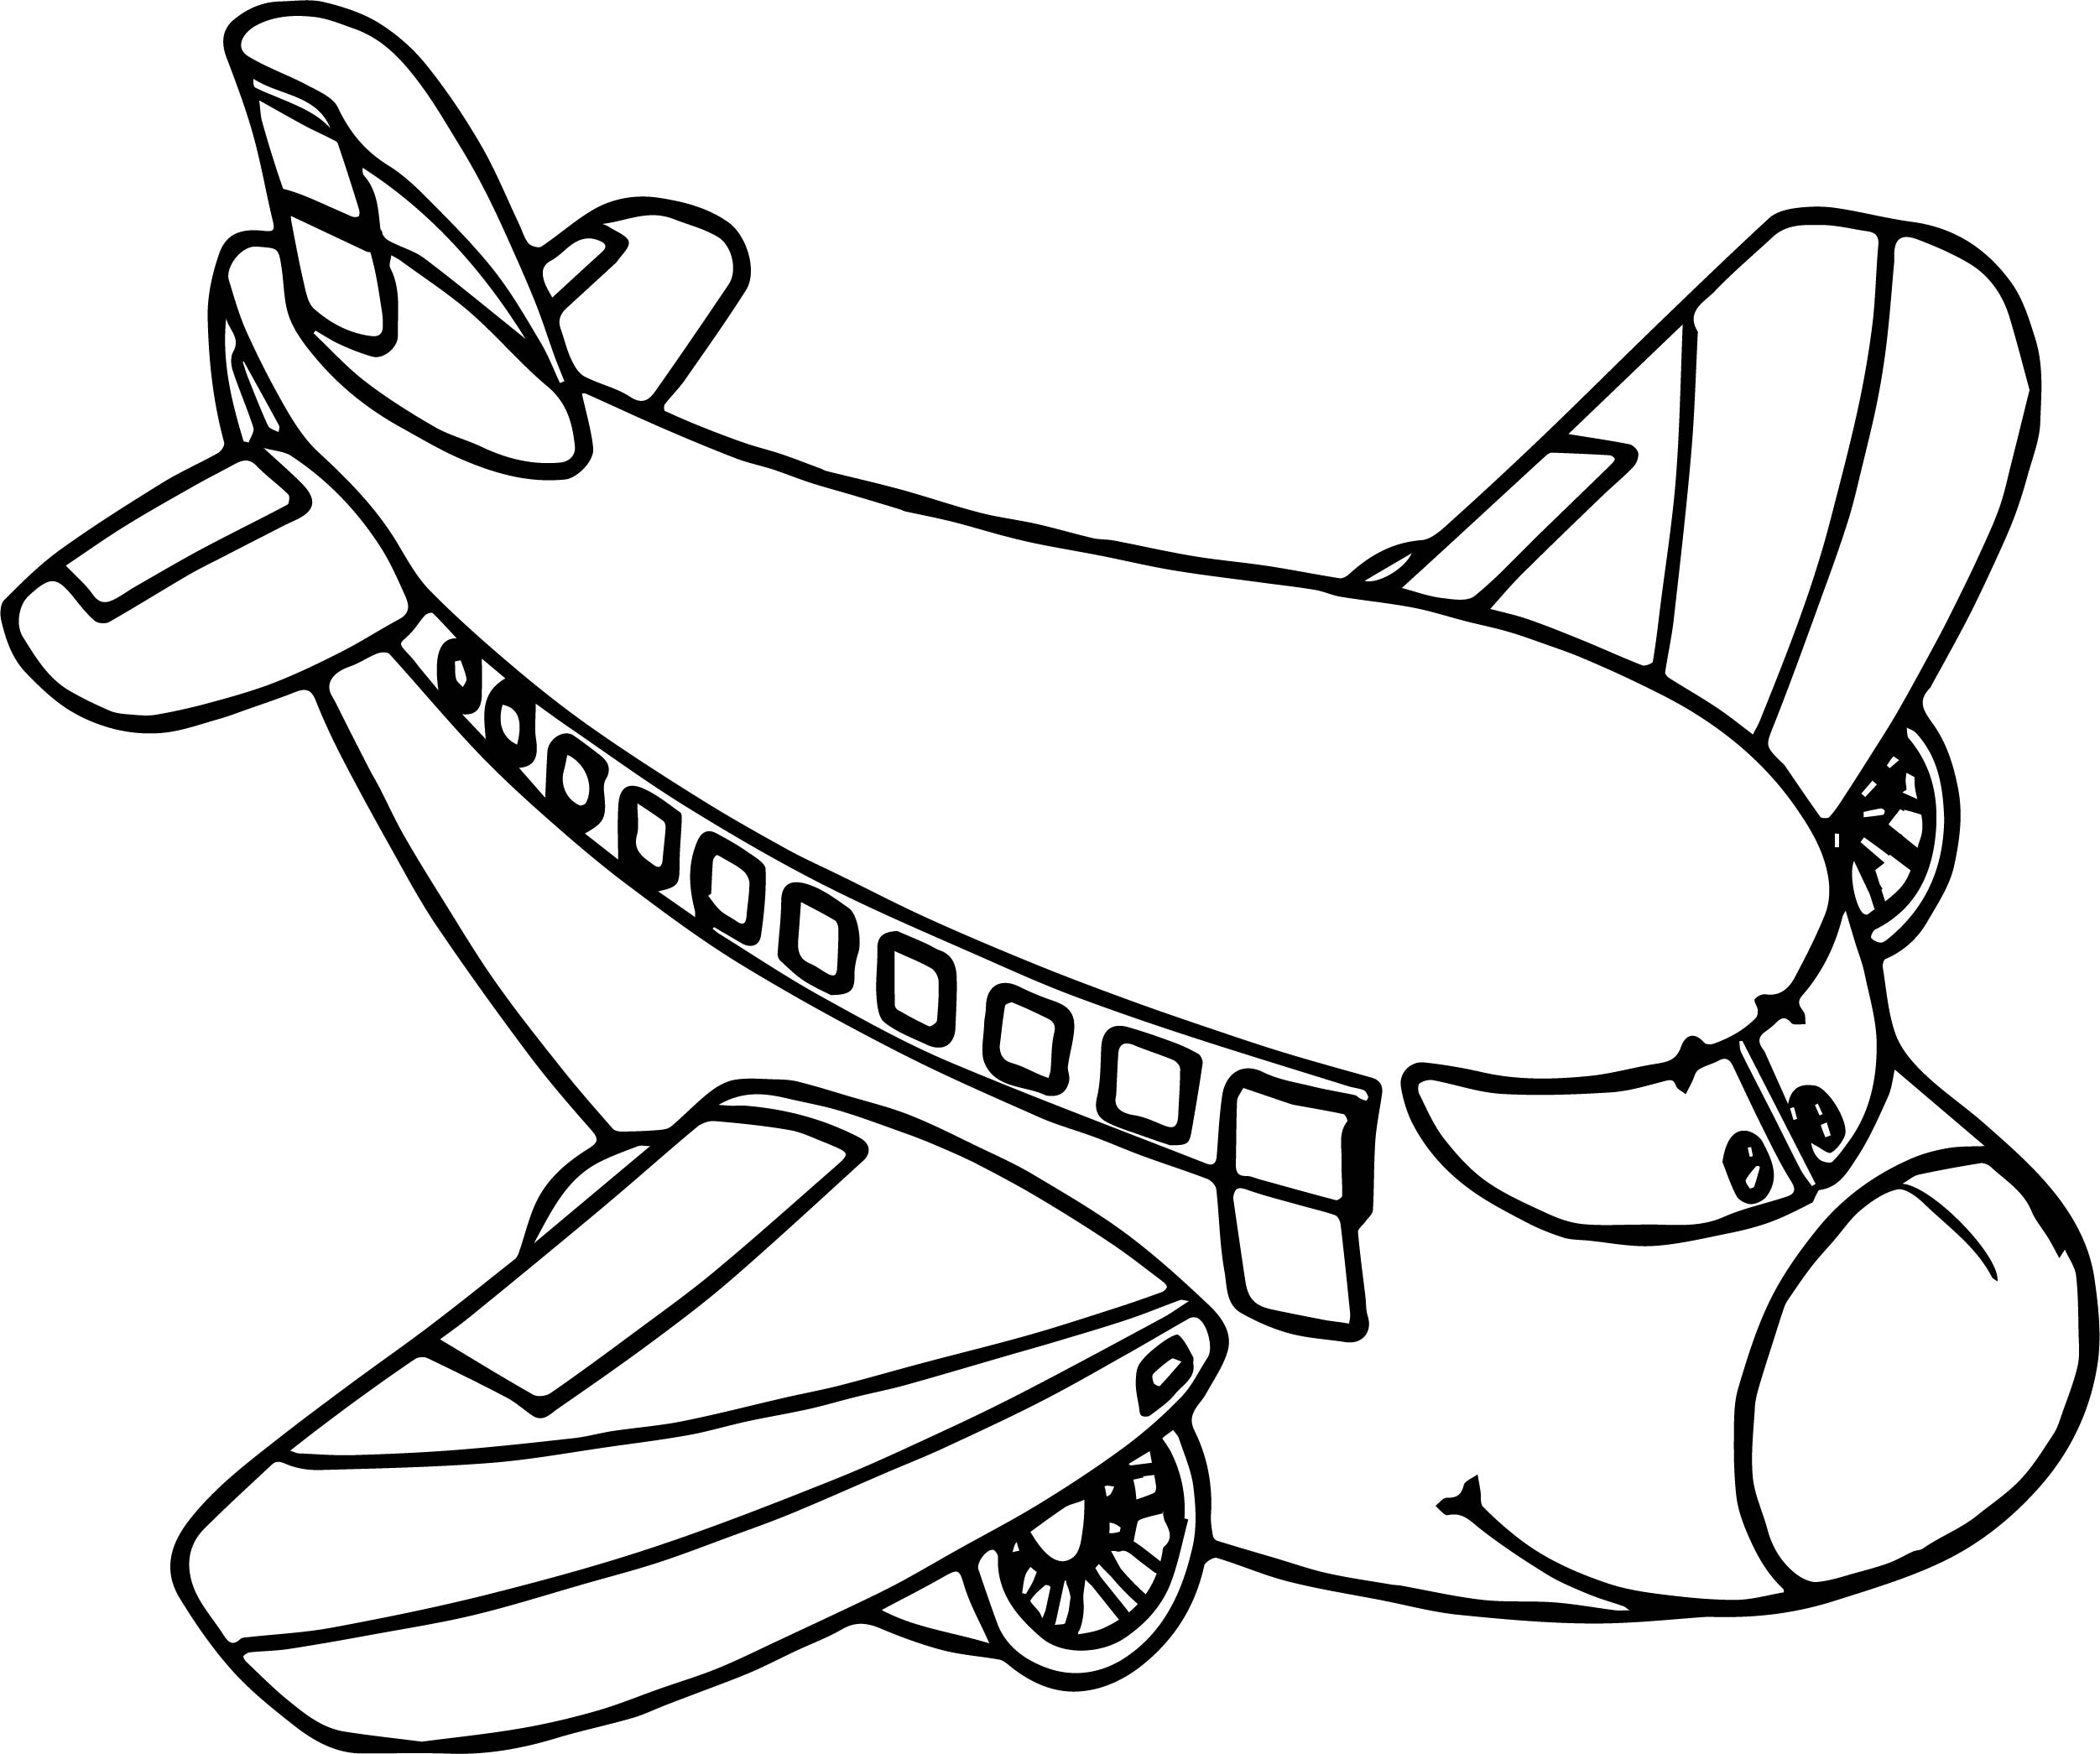 44+ Airplane Coloring Pages Printable Images - Color Pages Collection